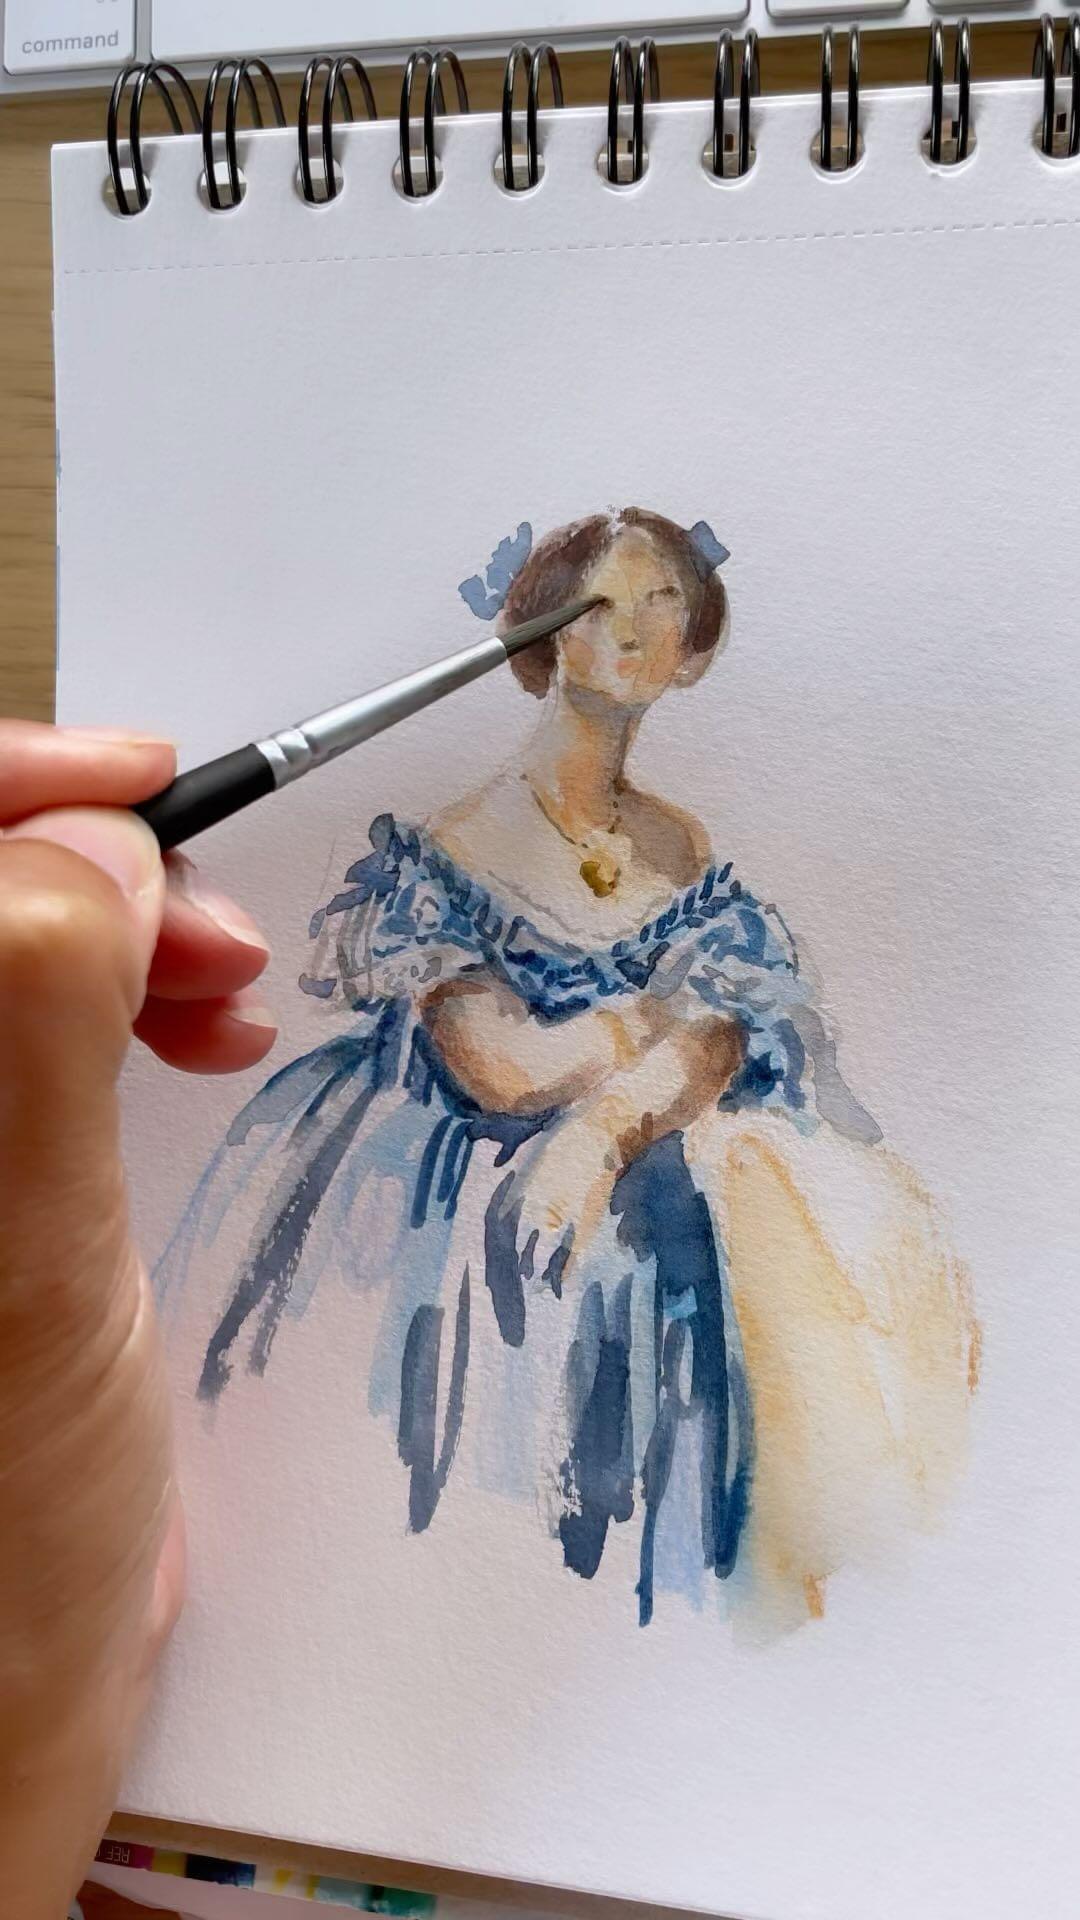 class="content__text"
 A quick Sunday watercolor sketch inspired by Ingres. What do you think? 
 #ingres #jeanaugustedominiqueingres #sundaysketches #watercolorsketching #watercolorpencil #gildedage #sketchbookproject 
 